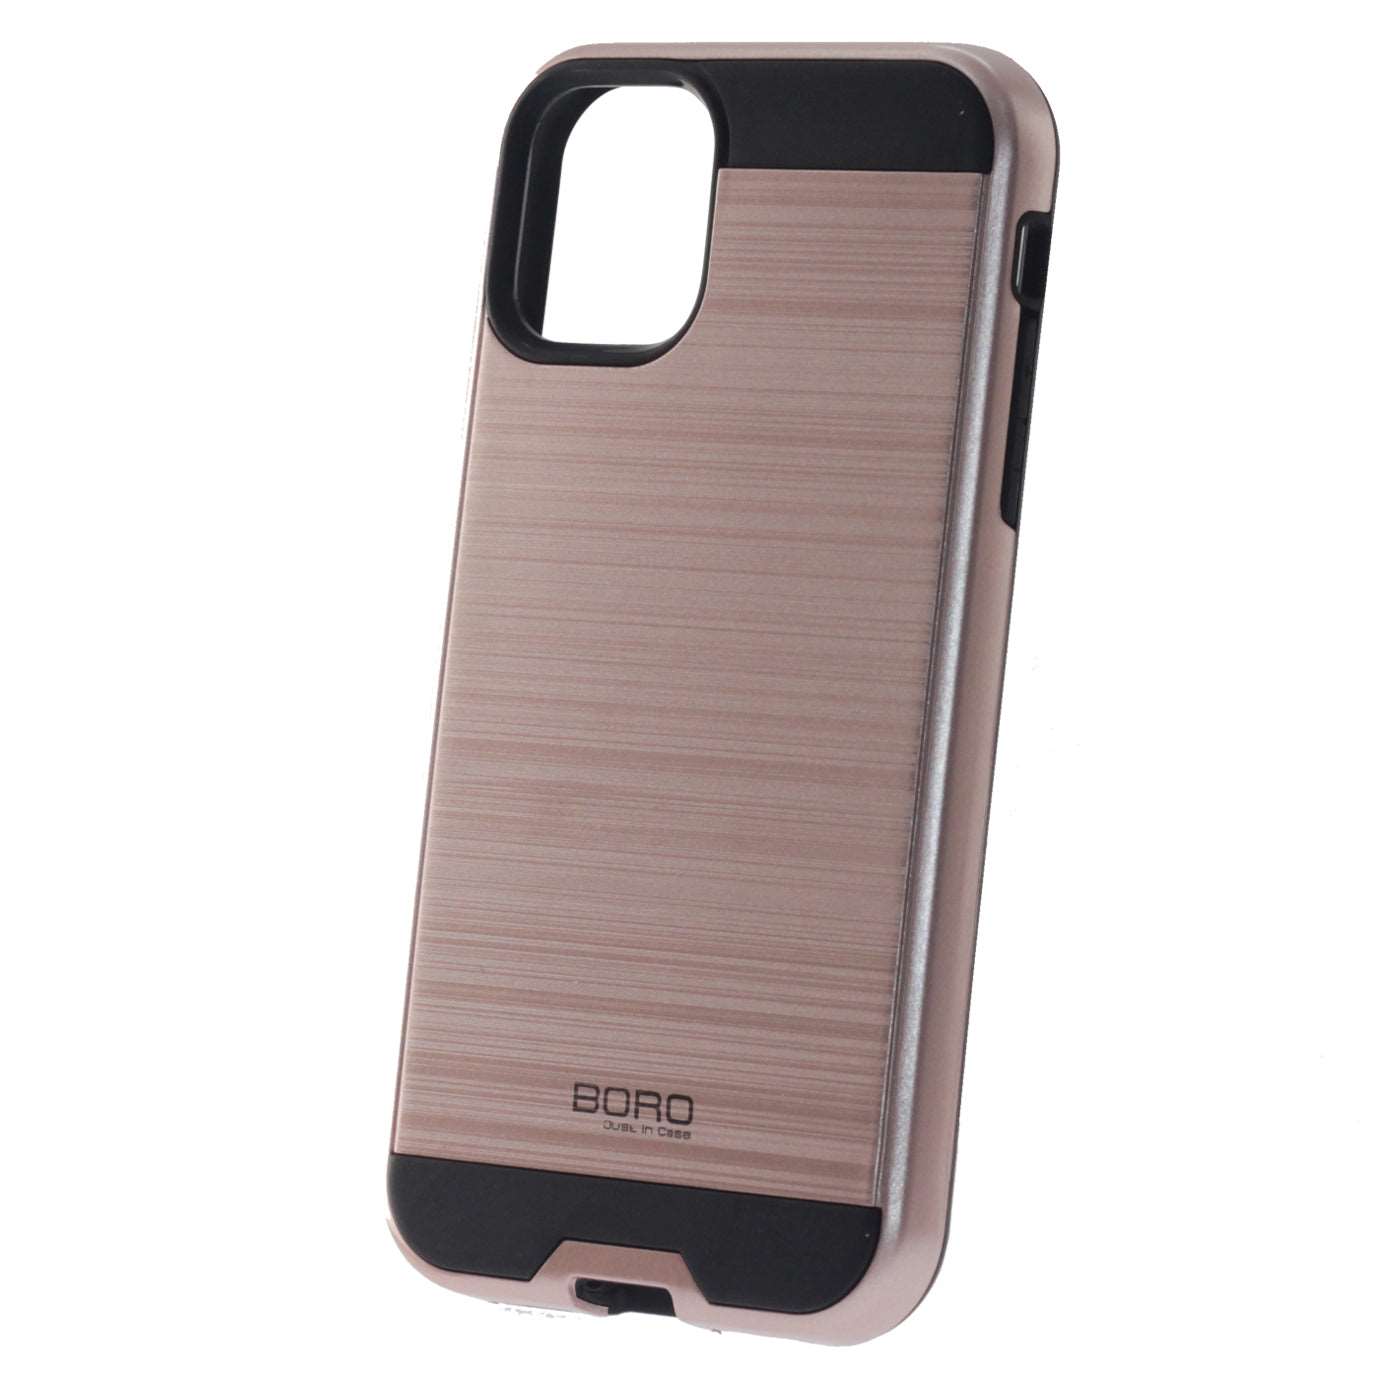 Apple iPhone 11, Case, Color Rose Gold,